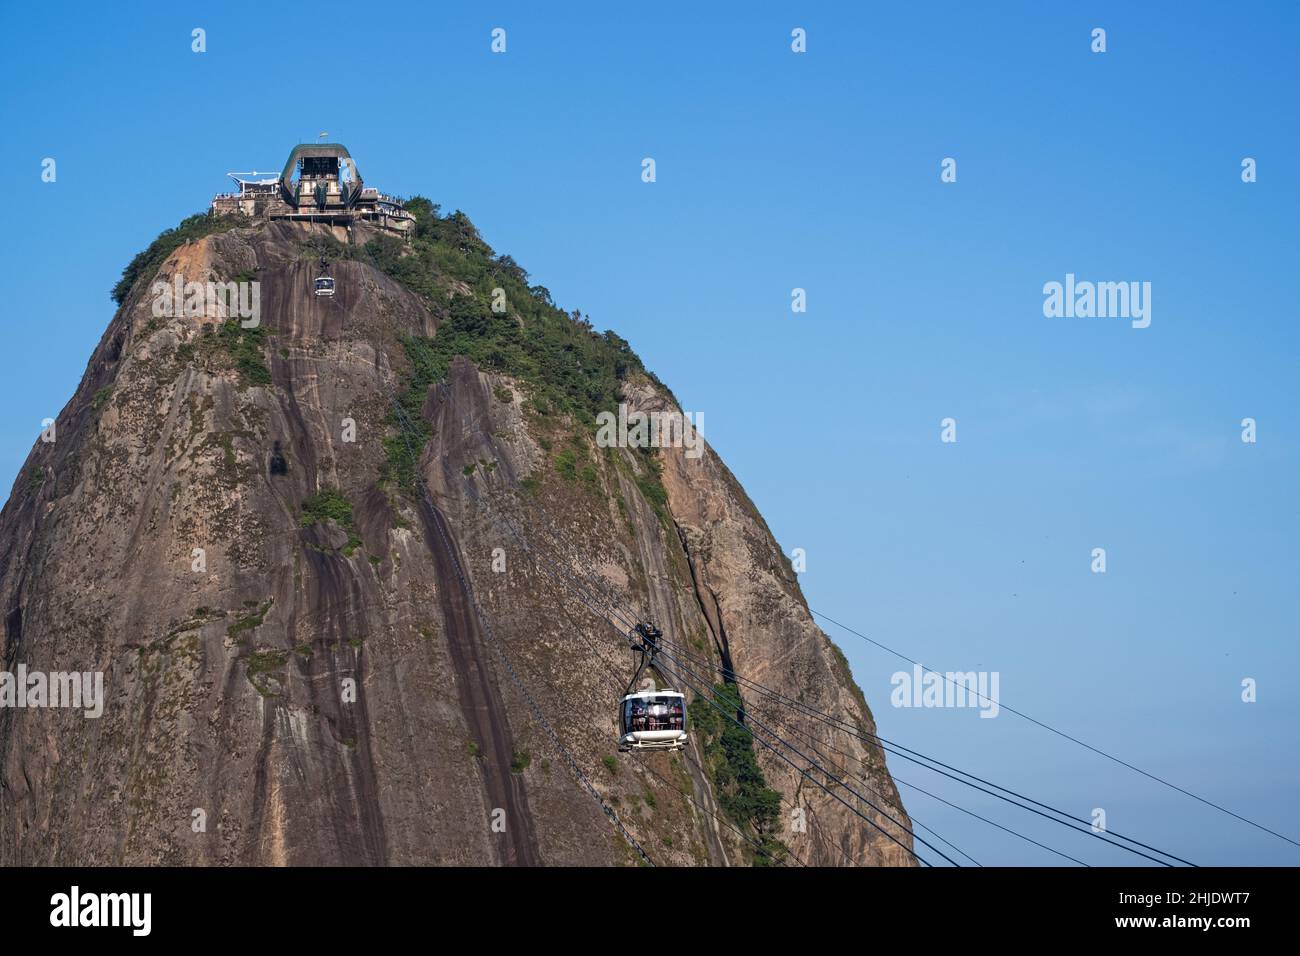 Cable cars on Sugar Loaf mountain, clear blue sky, no people, copy space, Rio de Janeiro, Brazil Stock Photo